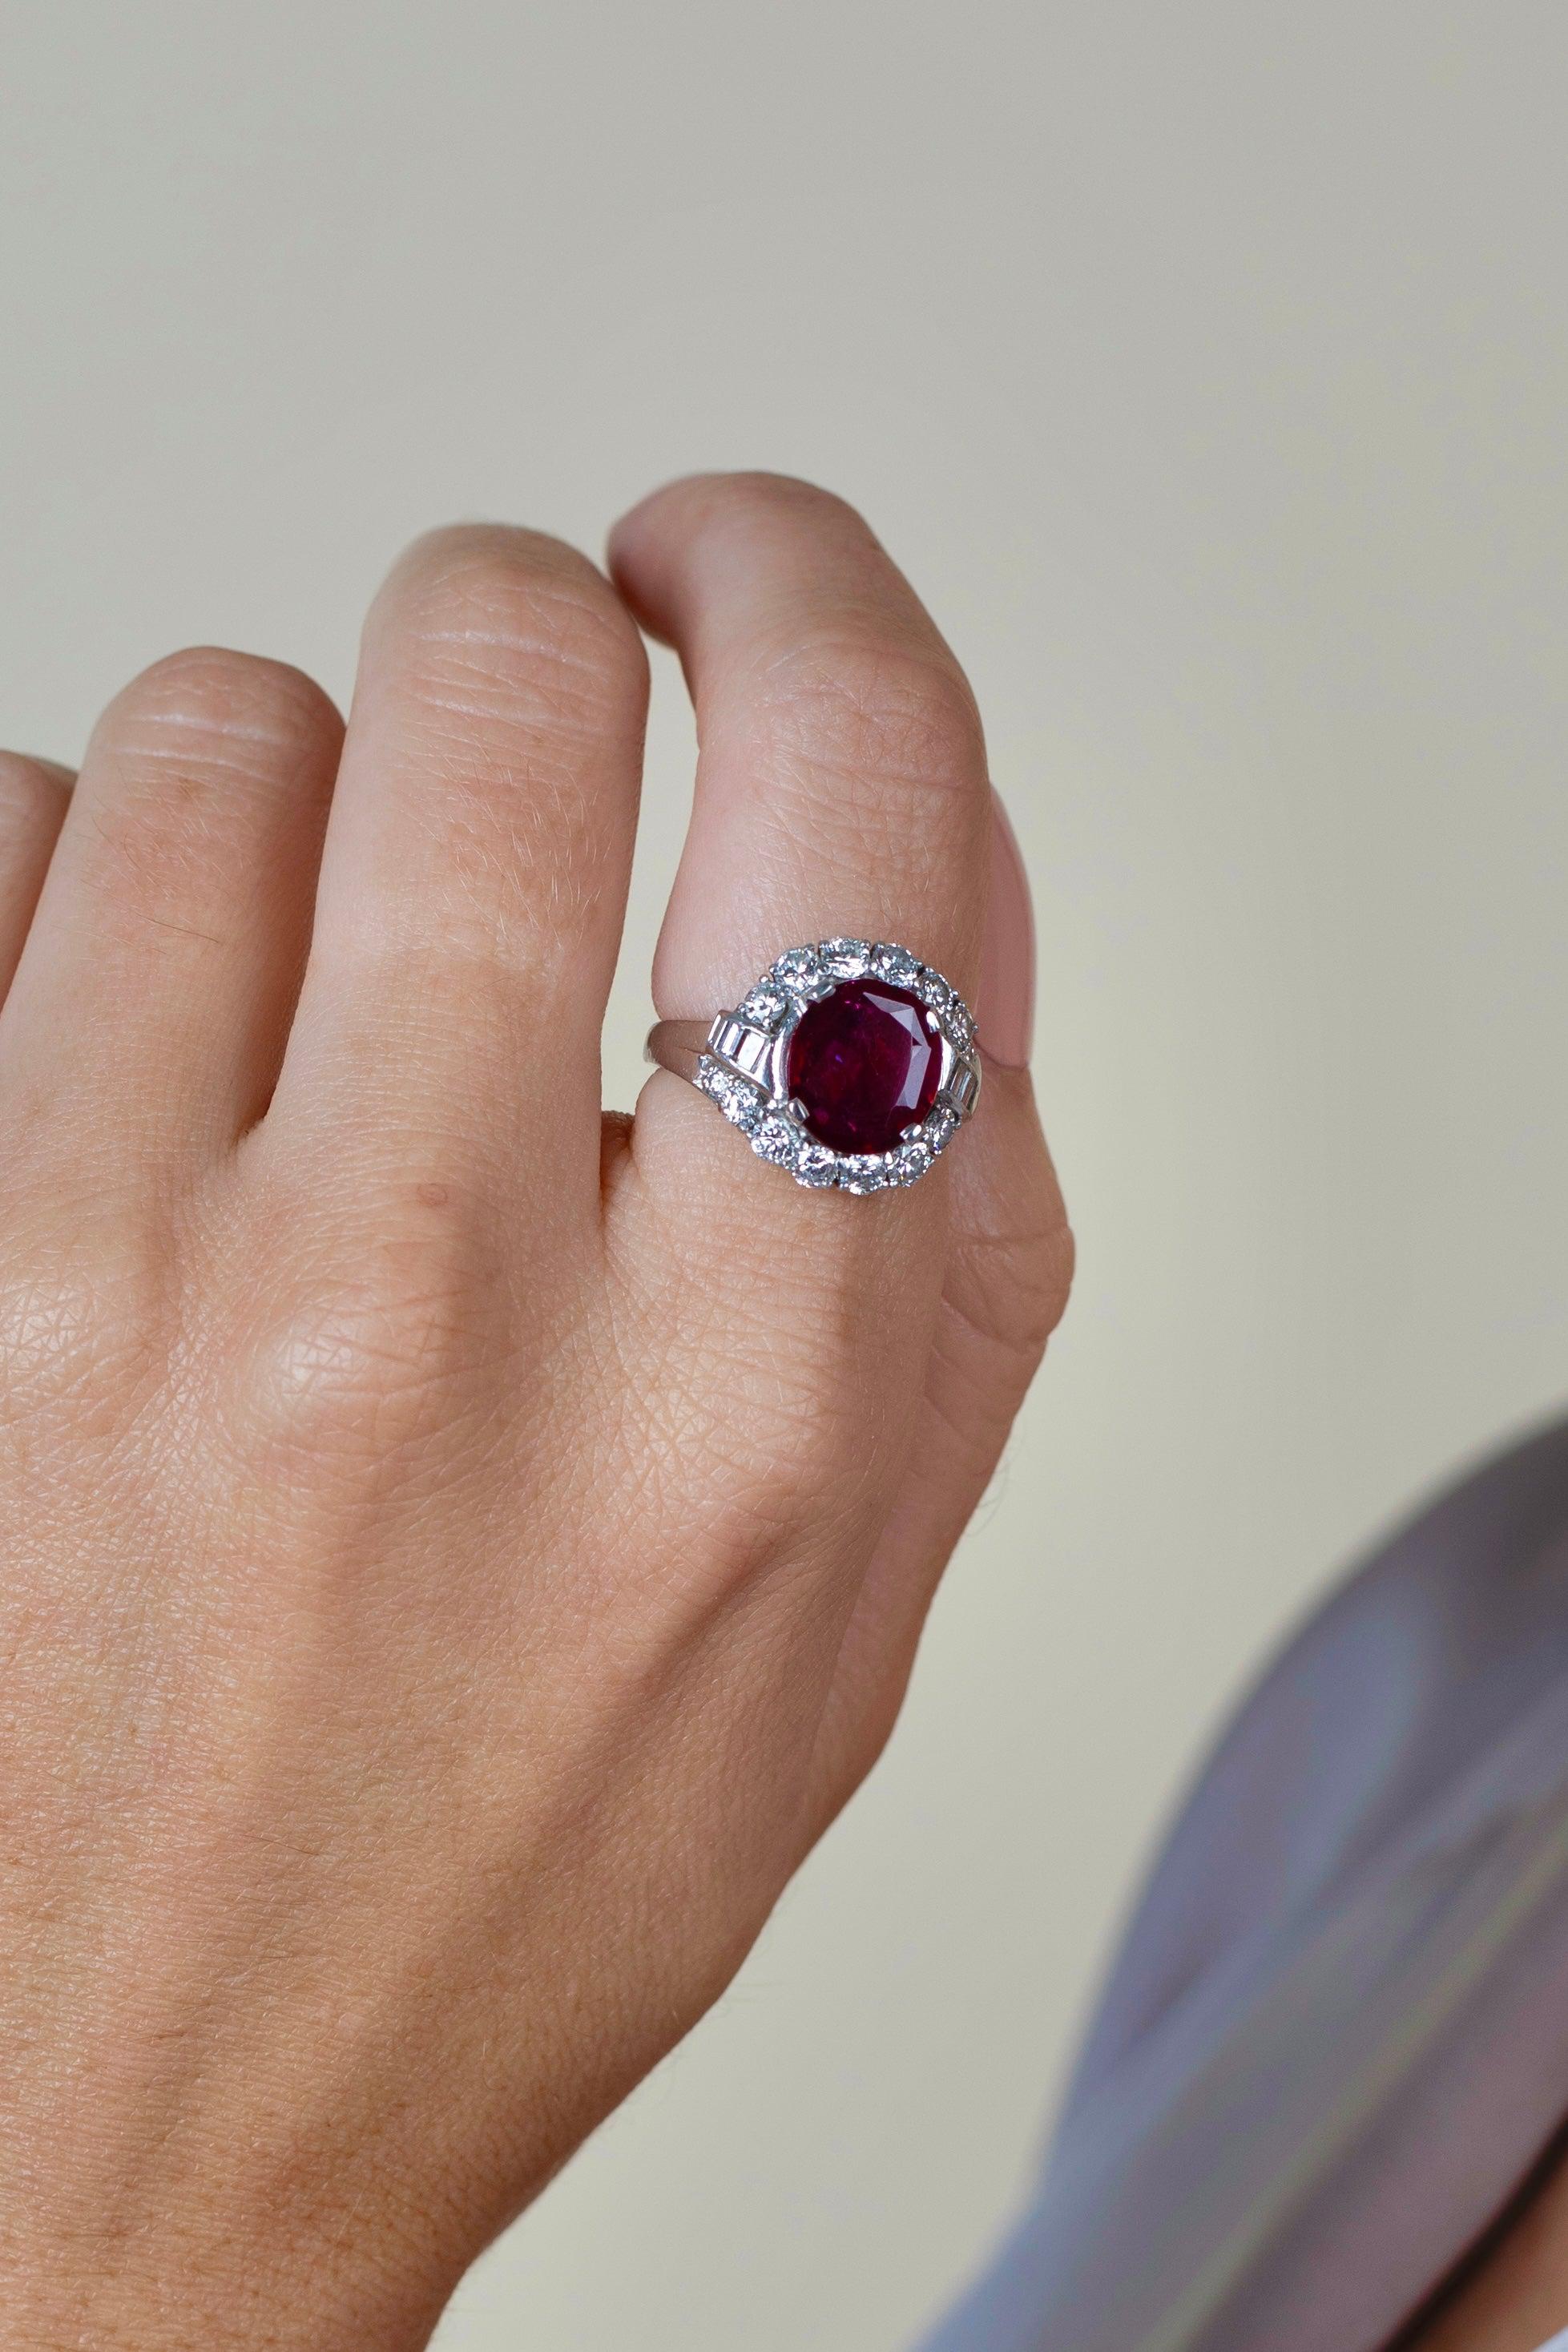 Antique Burma Ruby and Diamond Ring - FD Gallery